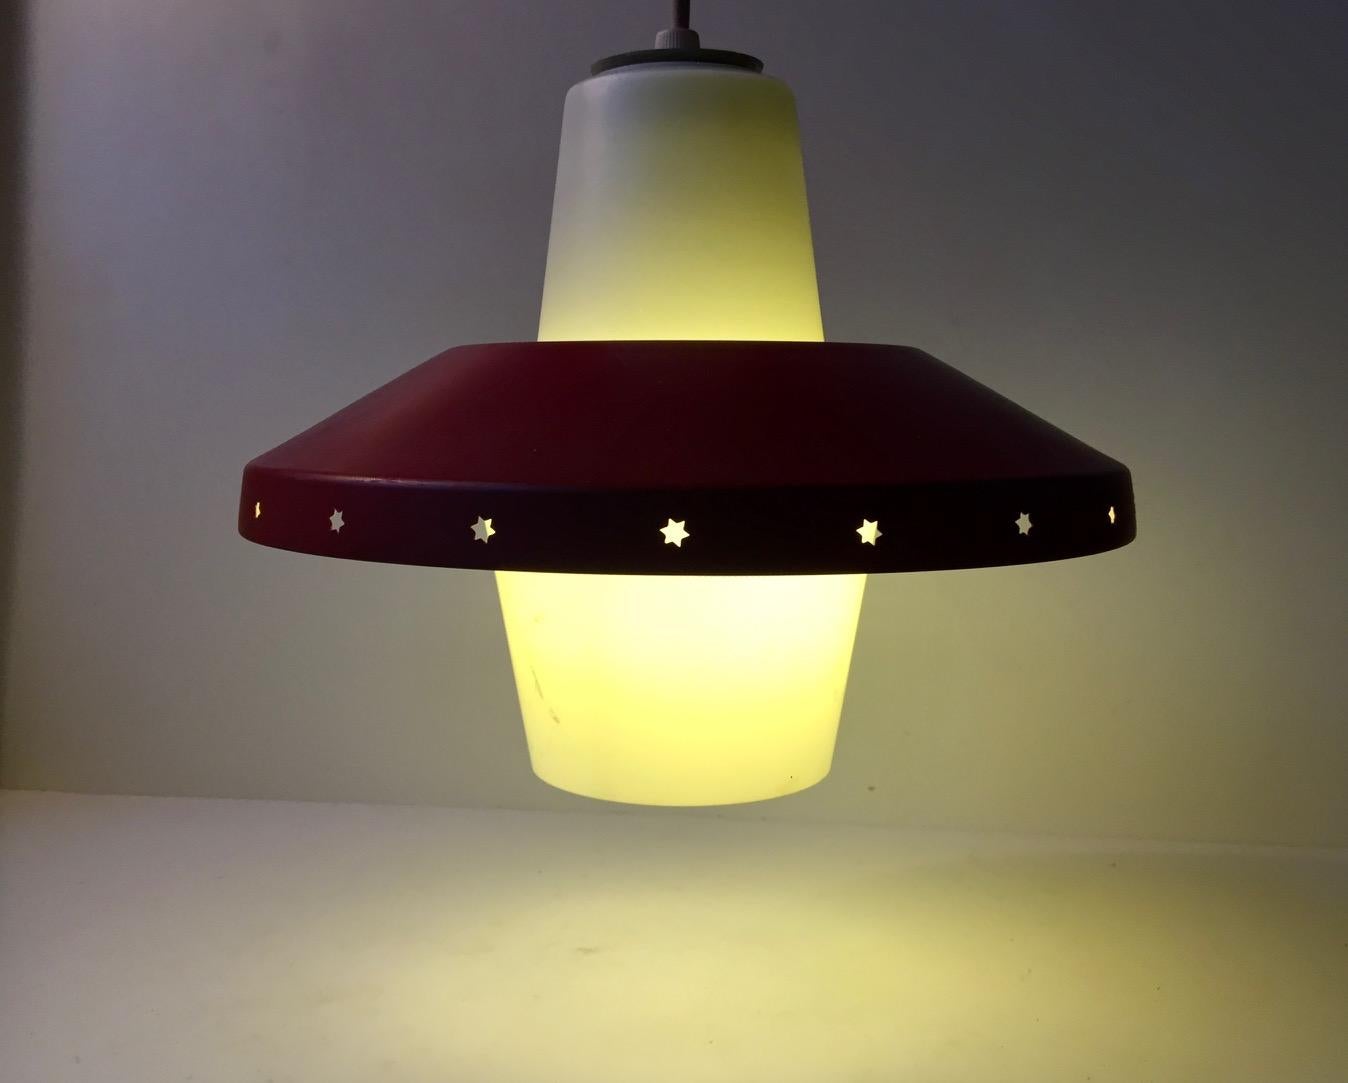 Mid-Century Modern Vintage White and Red Pendant Lamp by Bent Karlby for Lyfa, 1950s For Sale